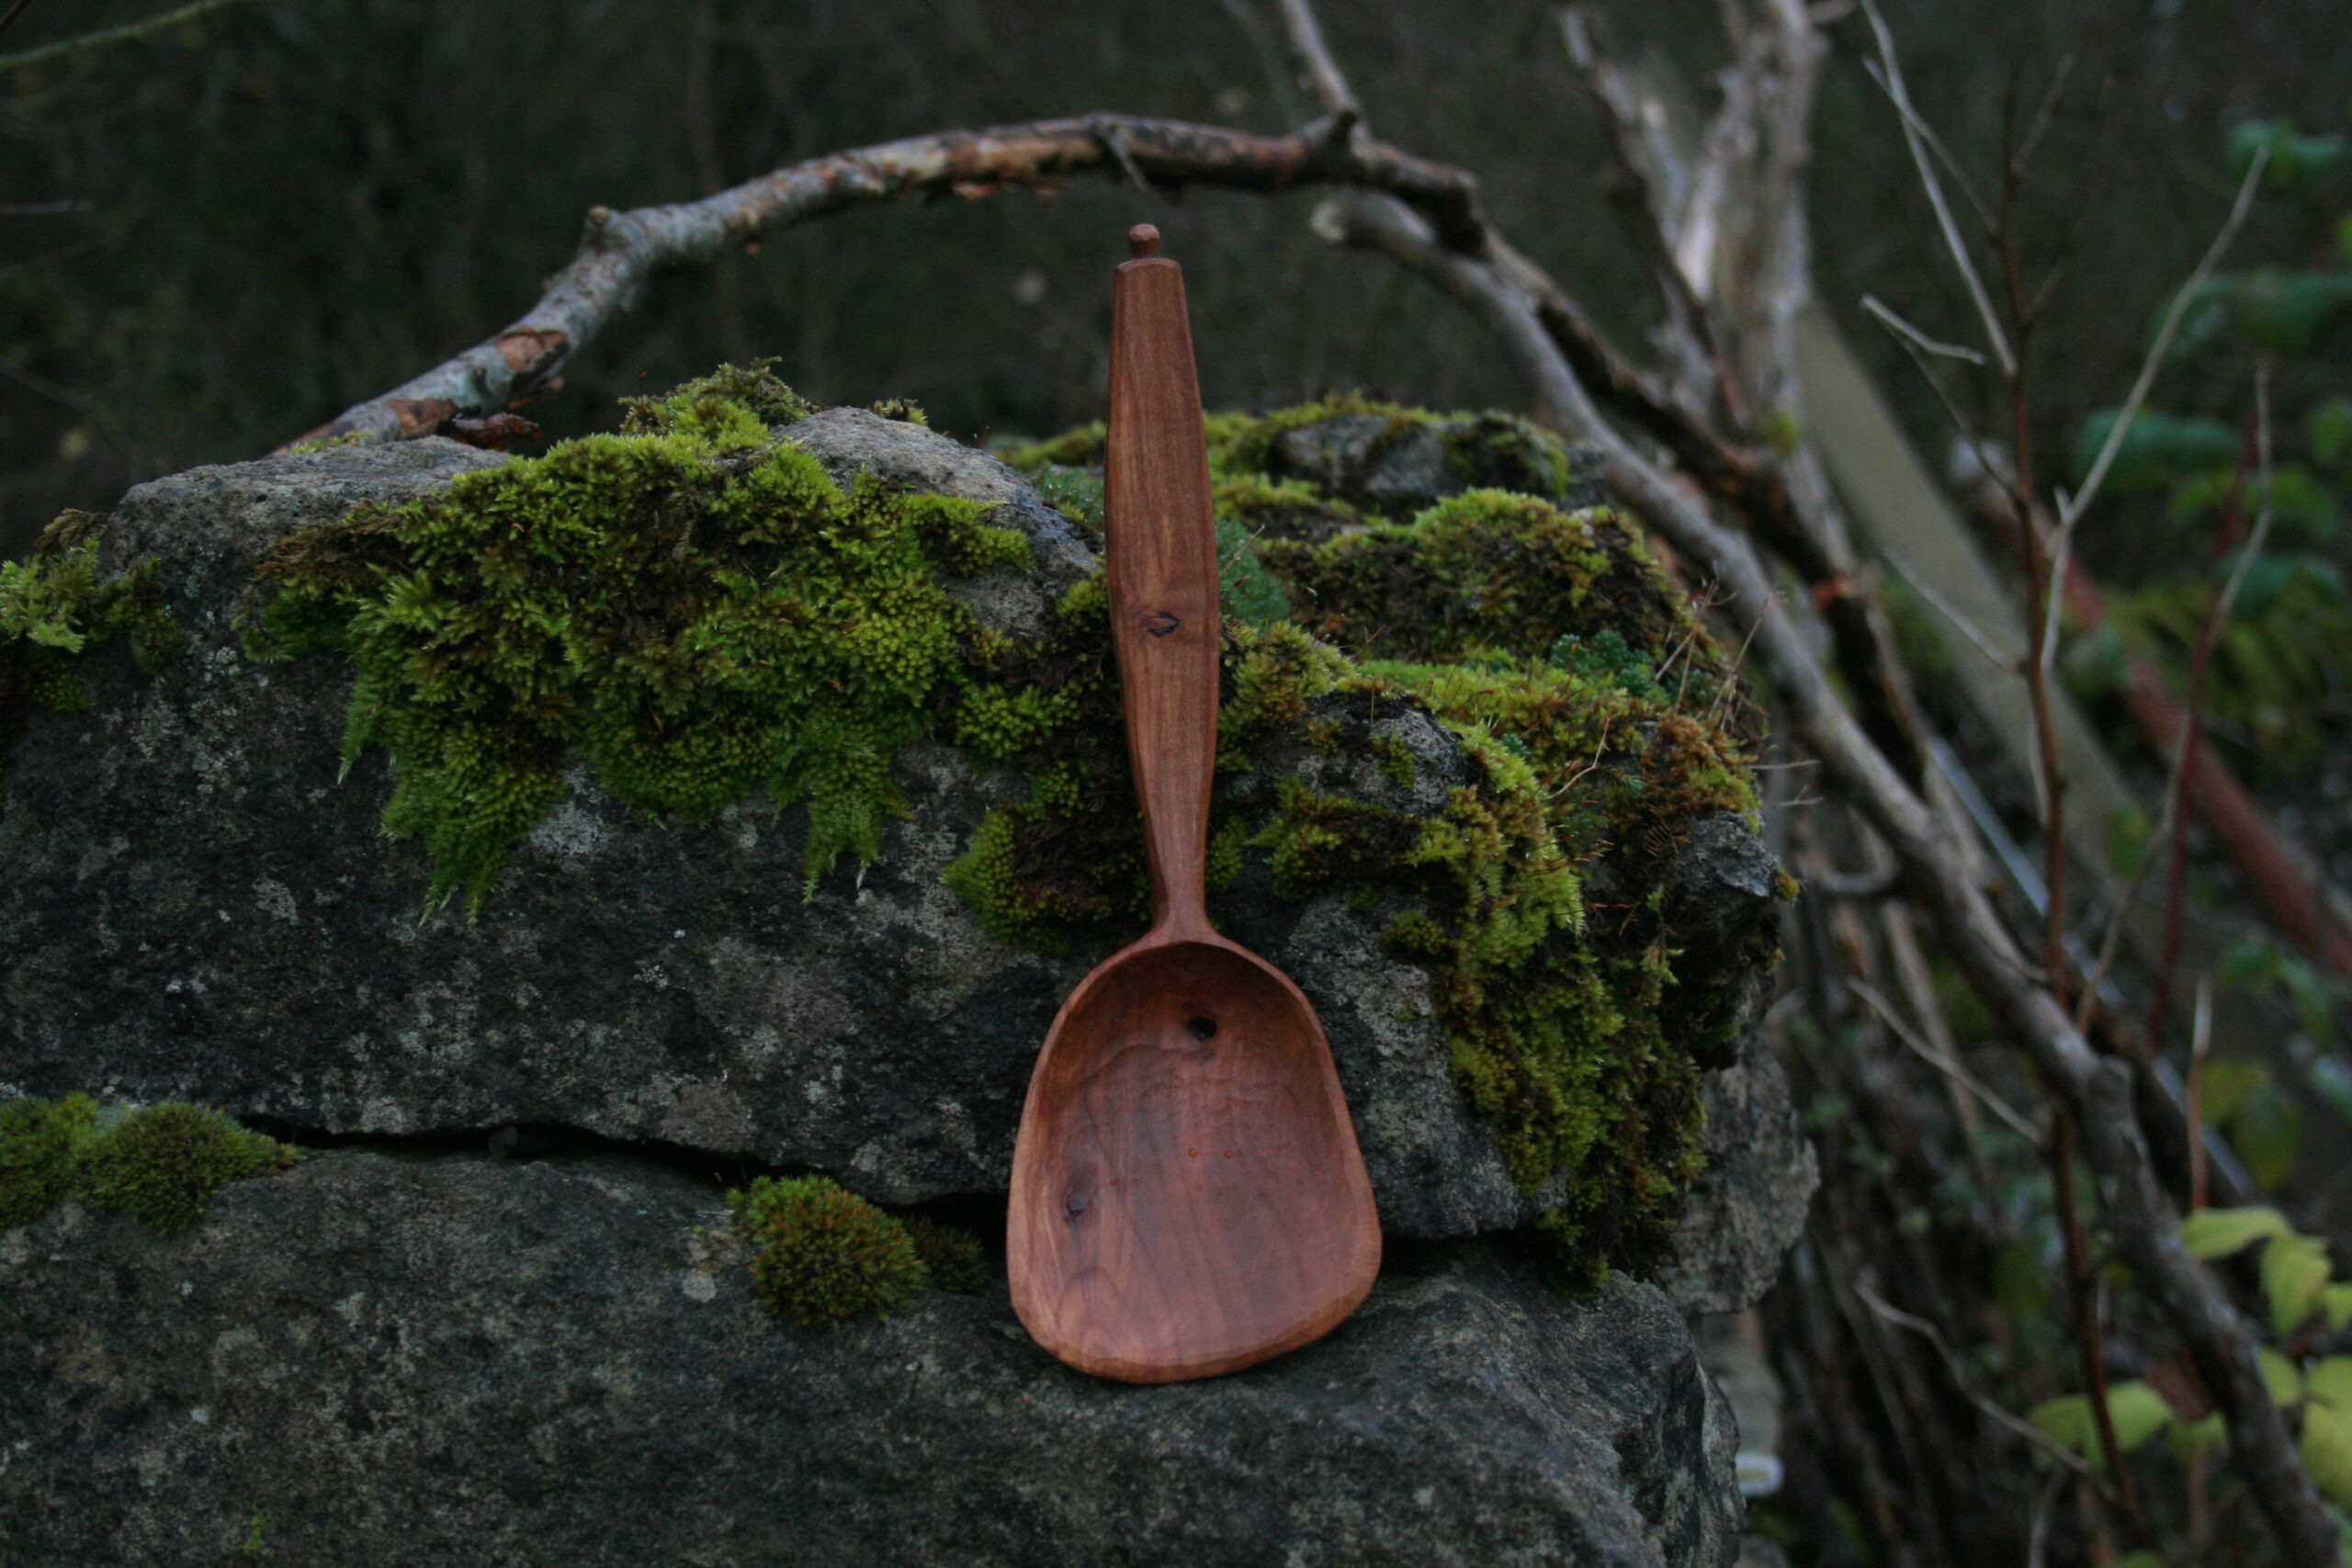 Right handed plum serving spoon